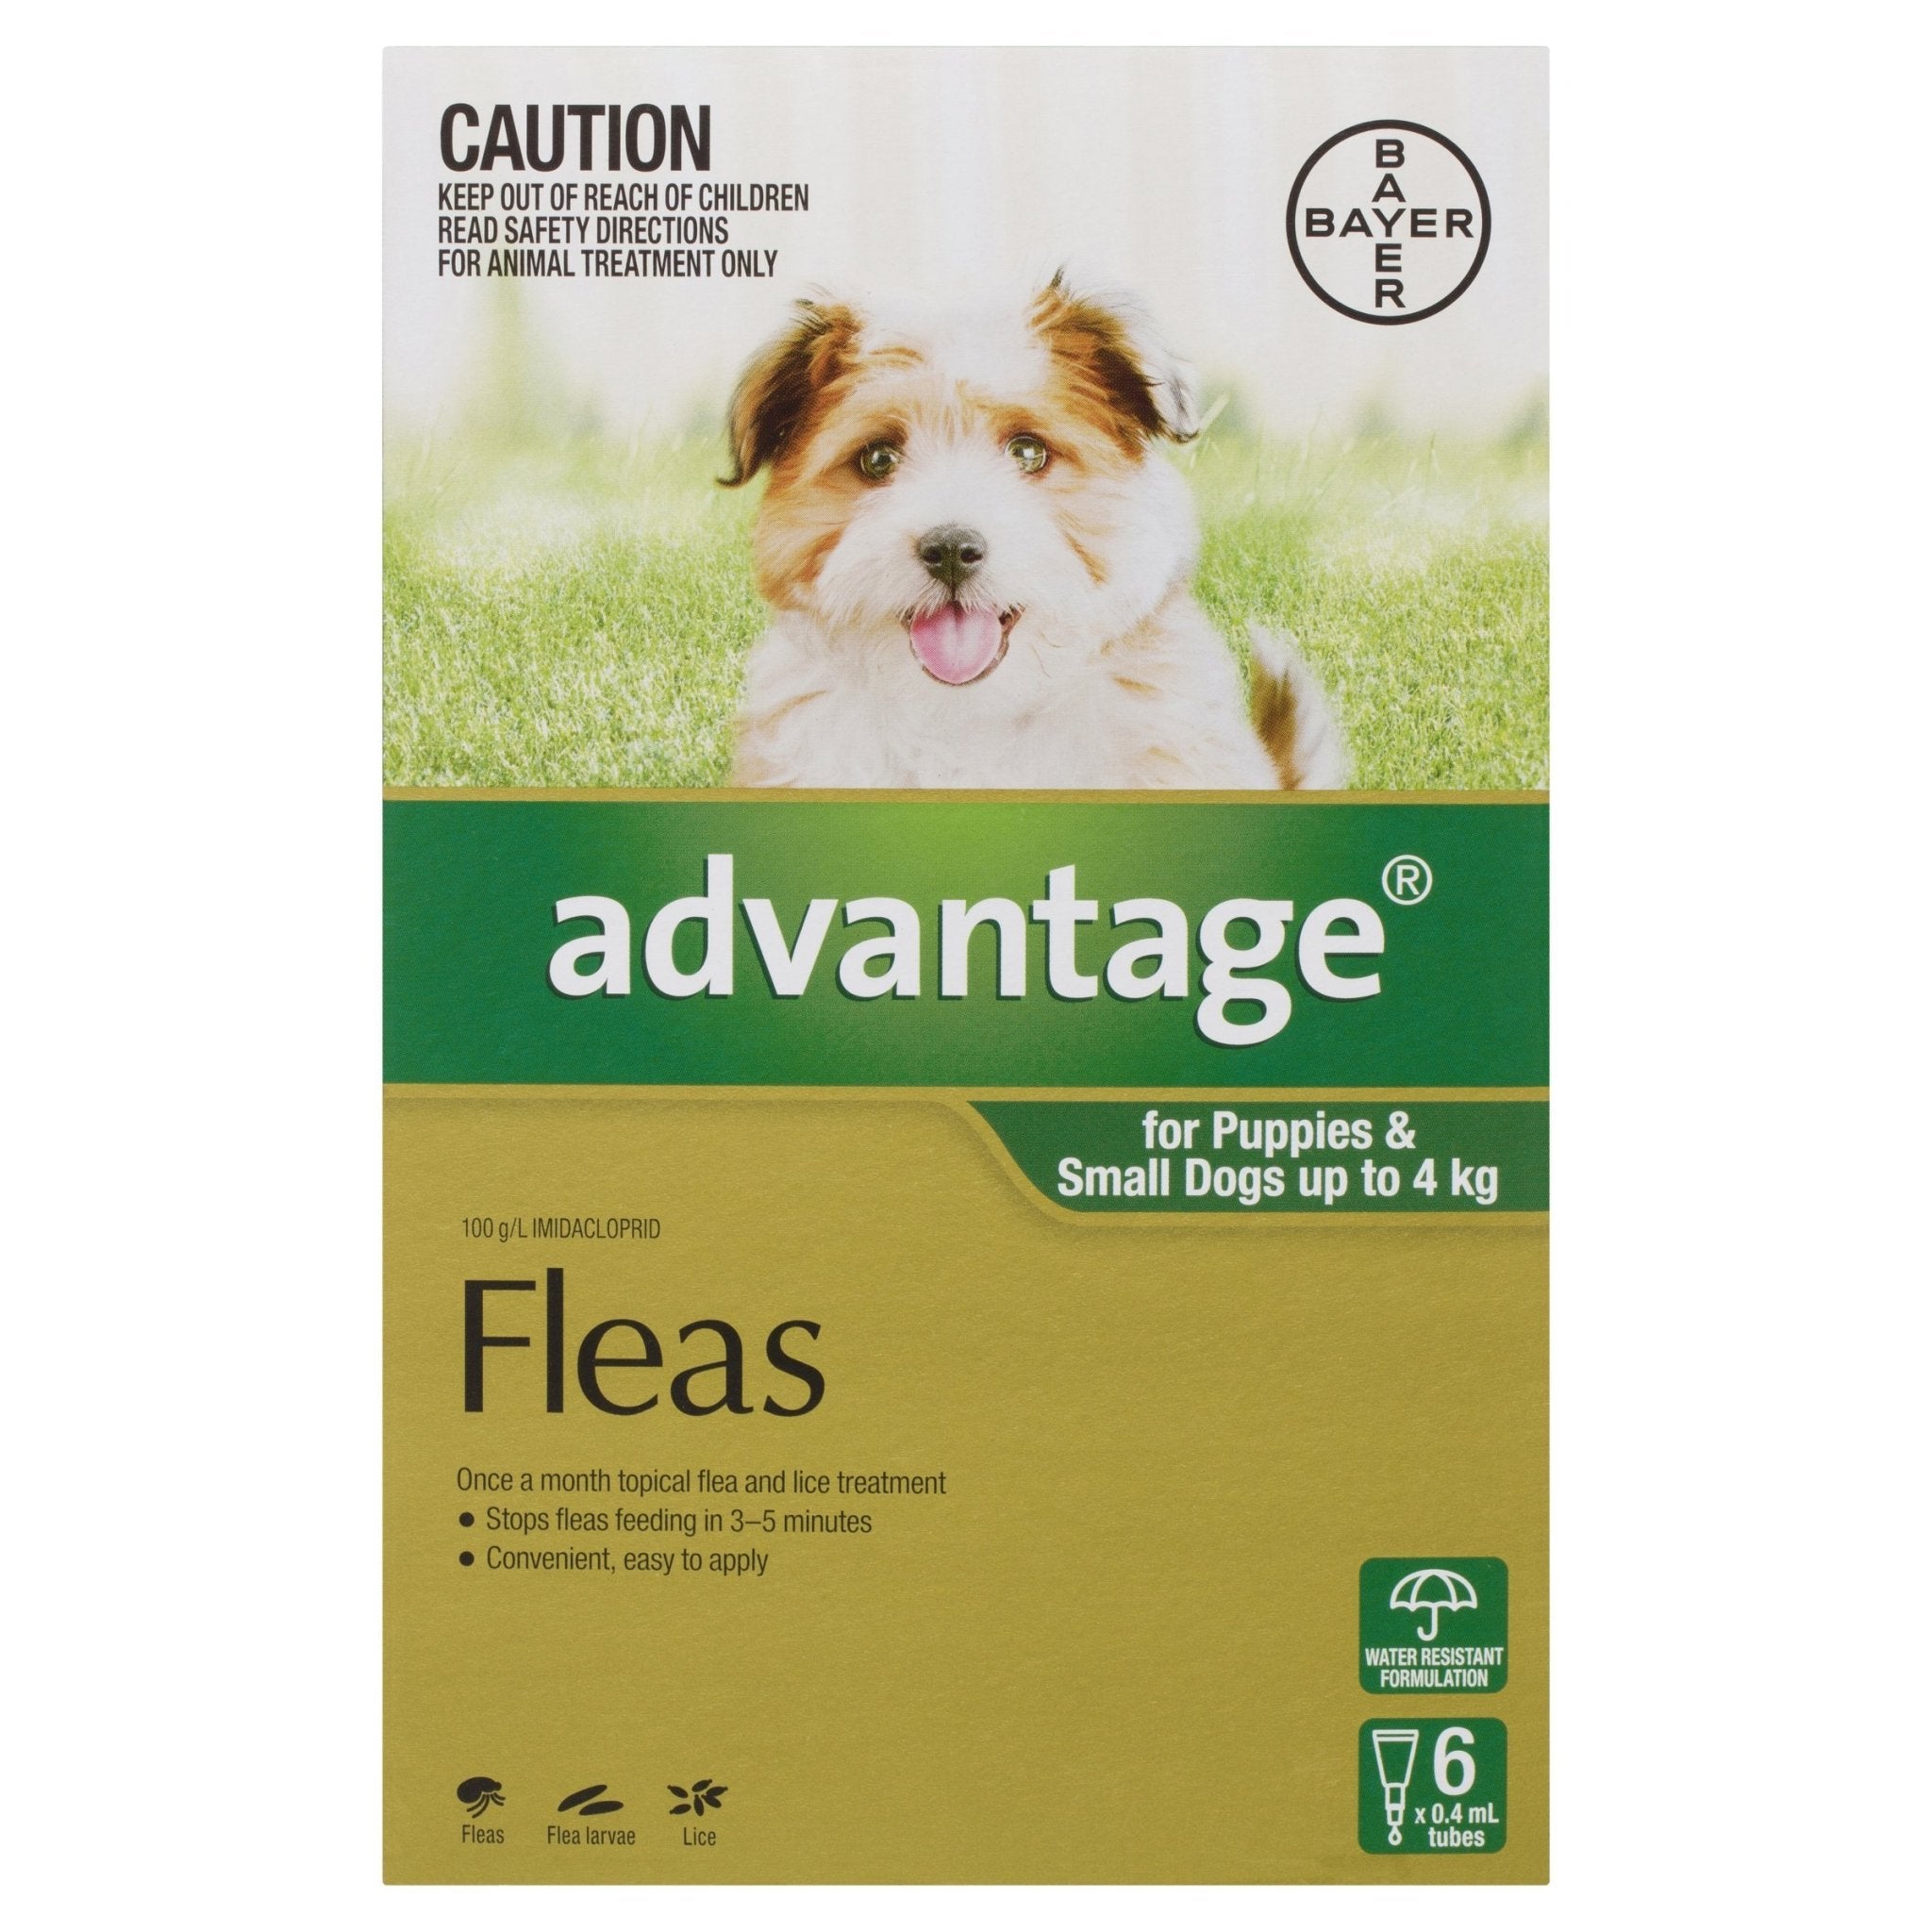 Advantage Fleas for Puppies & Small Dogs up to 4kg